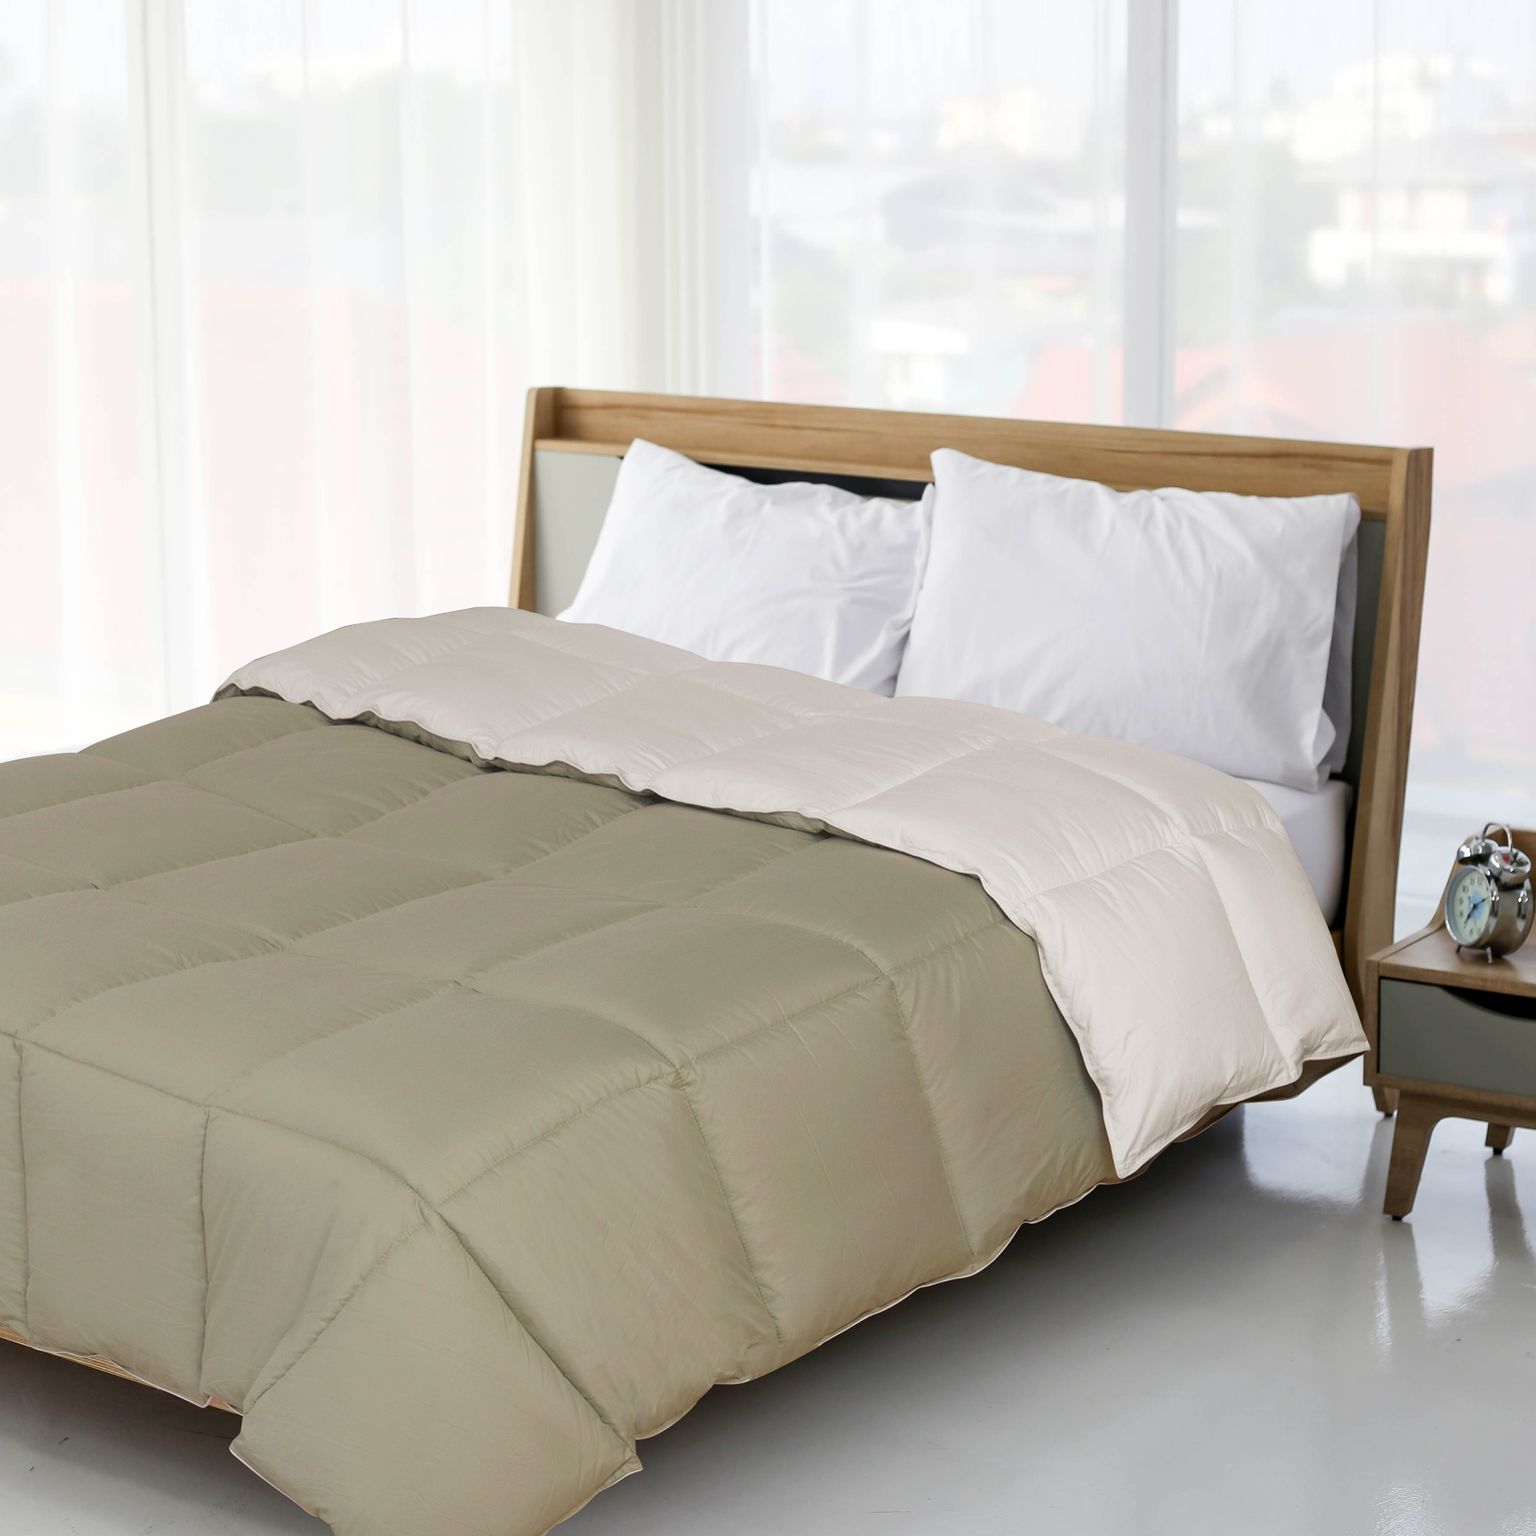 Superior Down Alternative Reversible Comforter, Full/ Queen, Ivory/ Sage - image 2 of 4